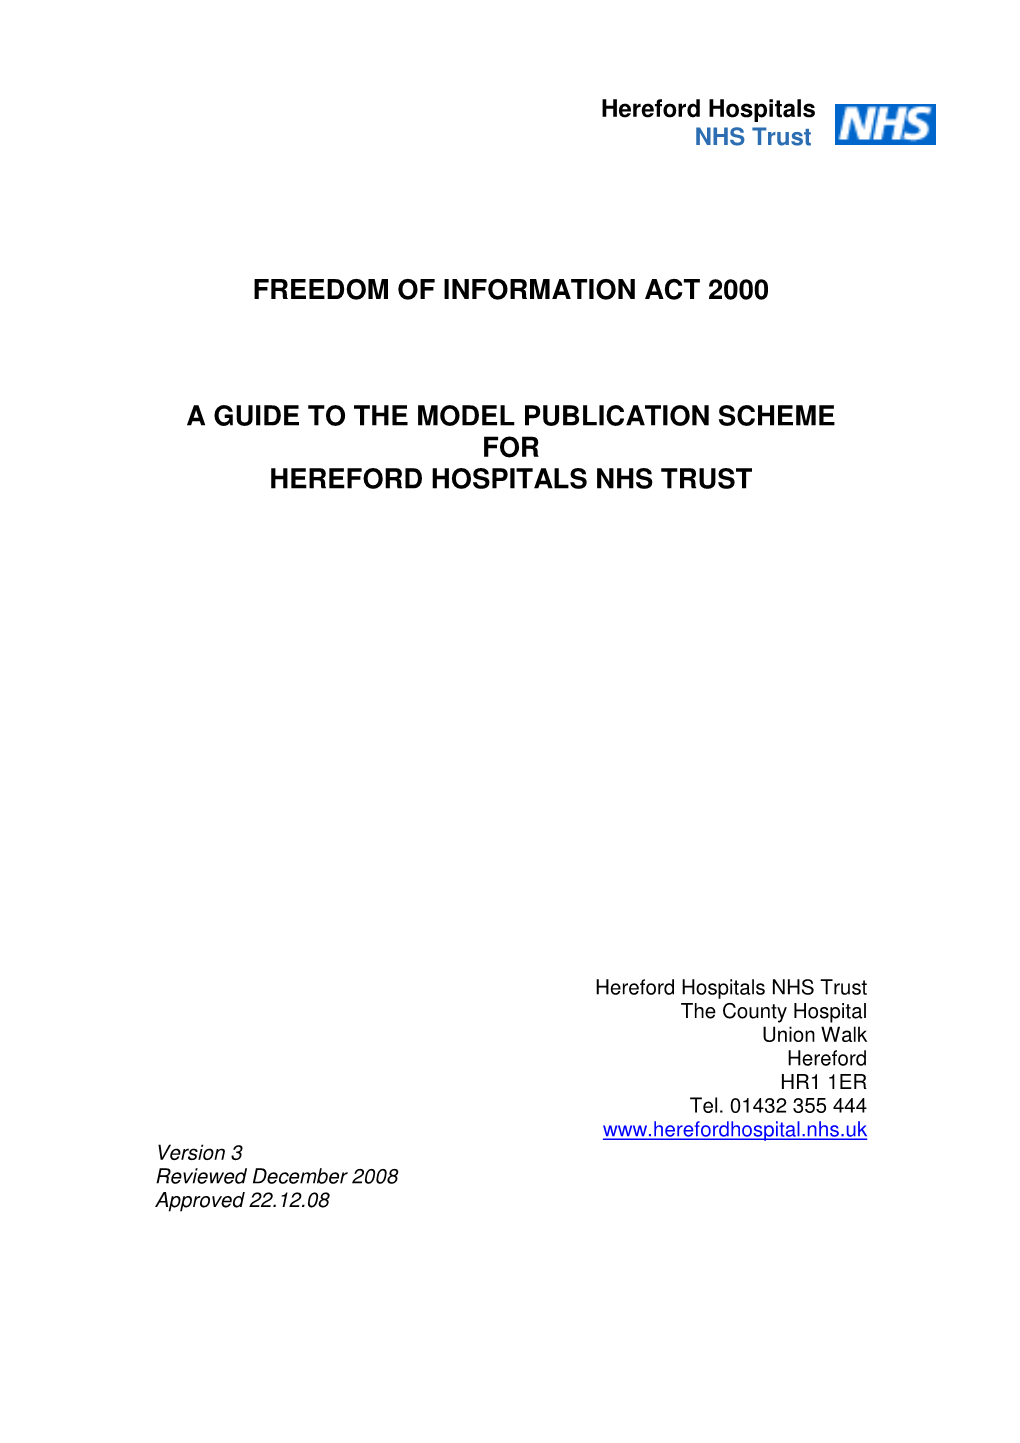 Freedom of Information Act 2000 a Guide to the Model